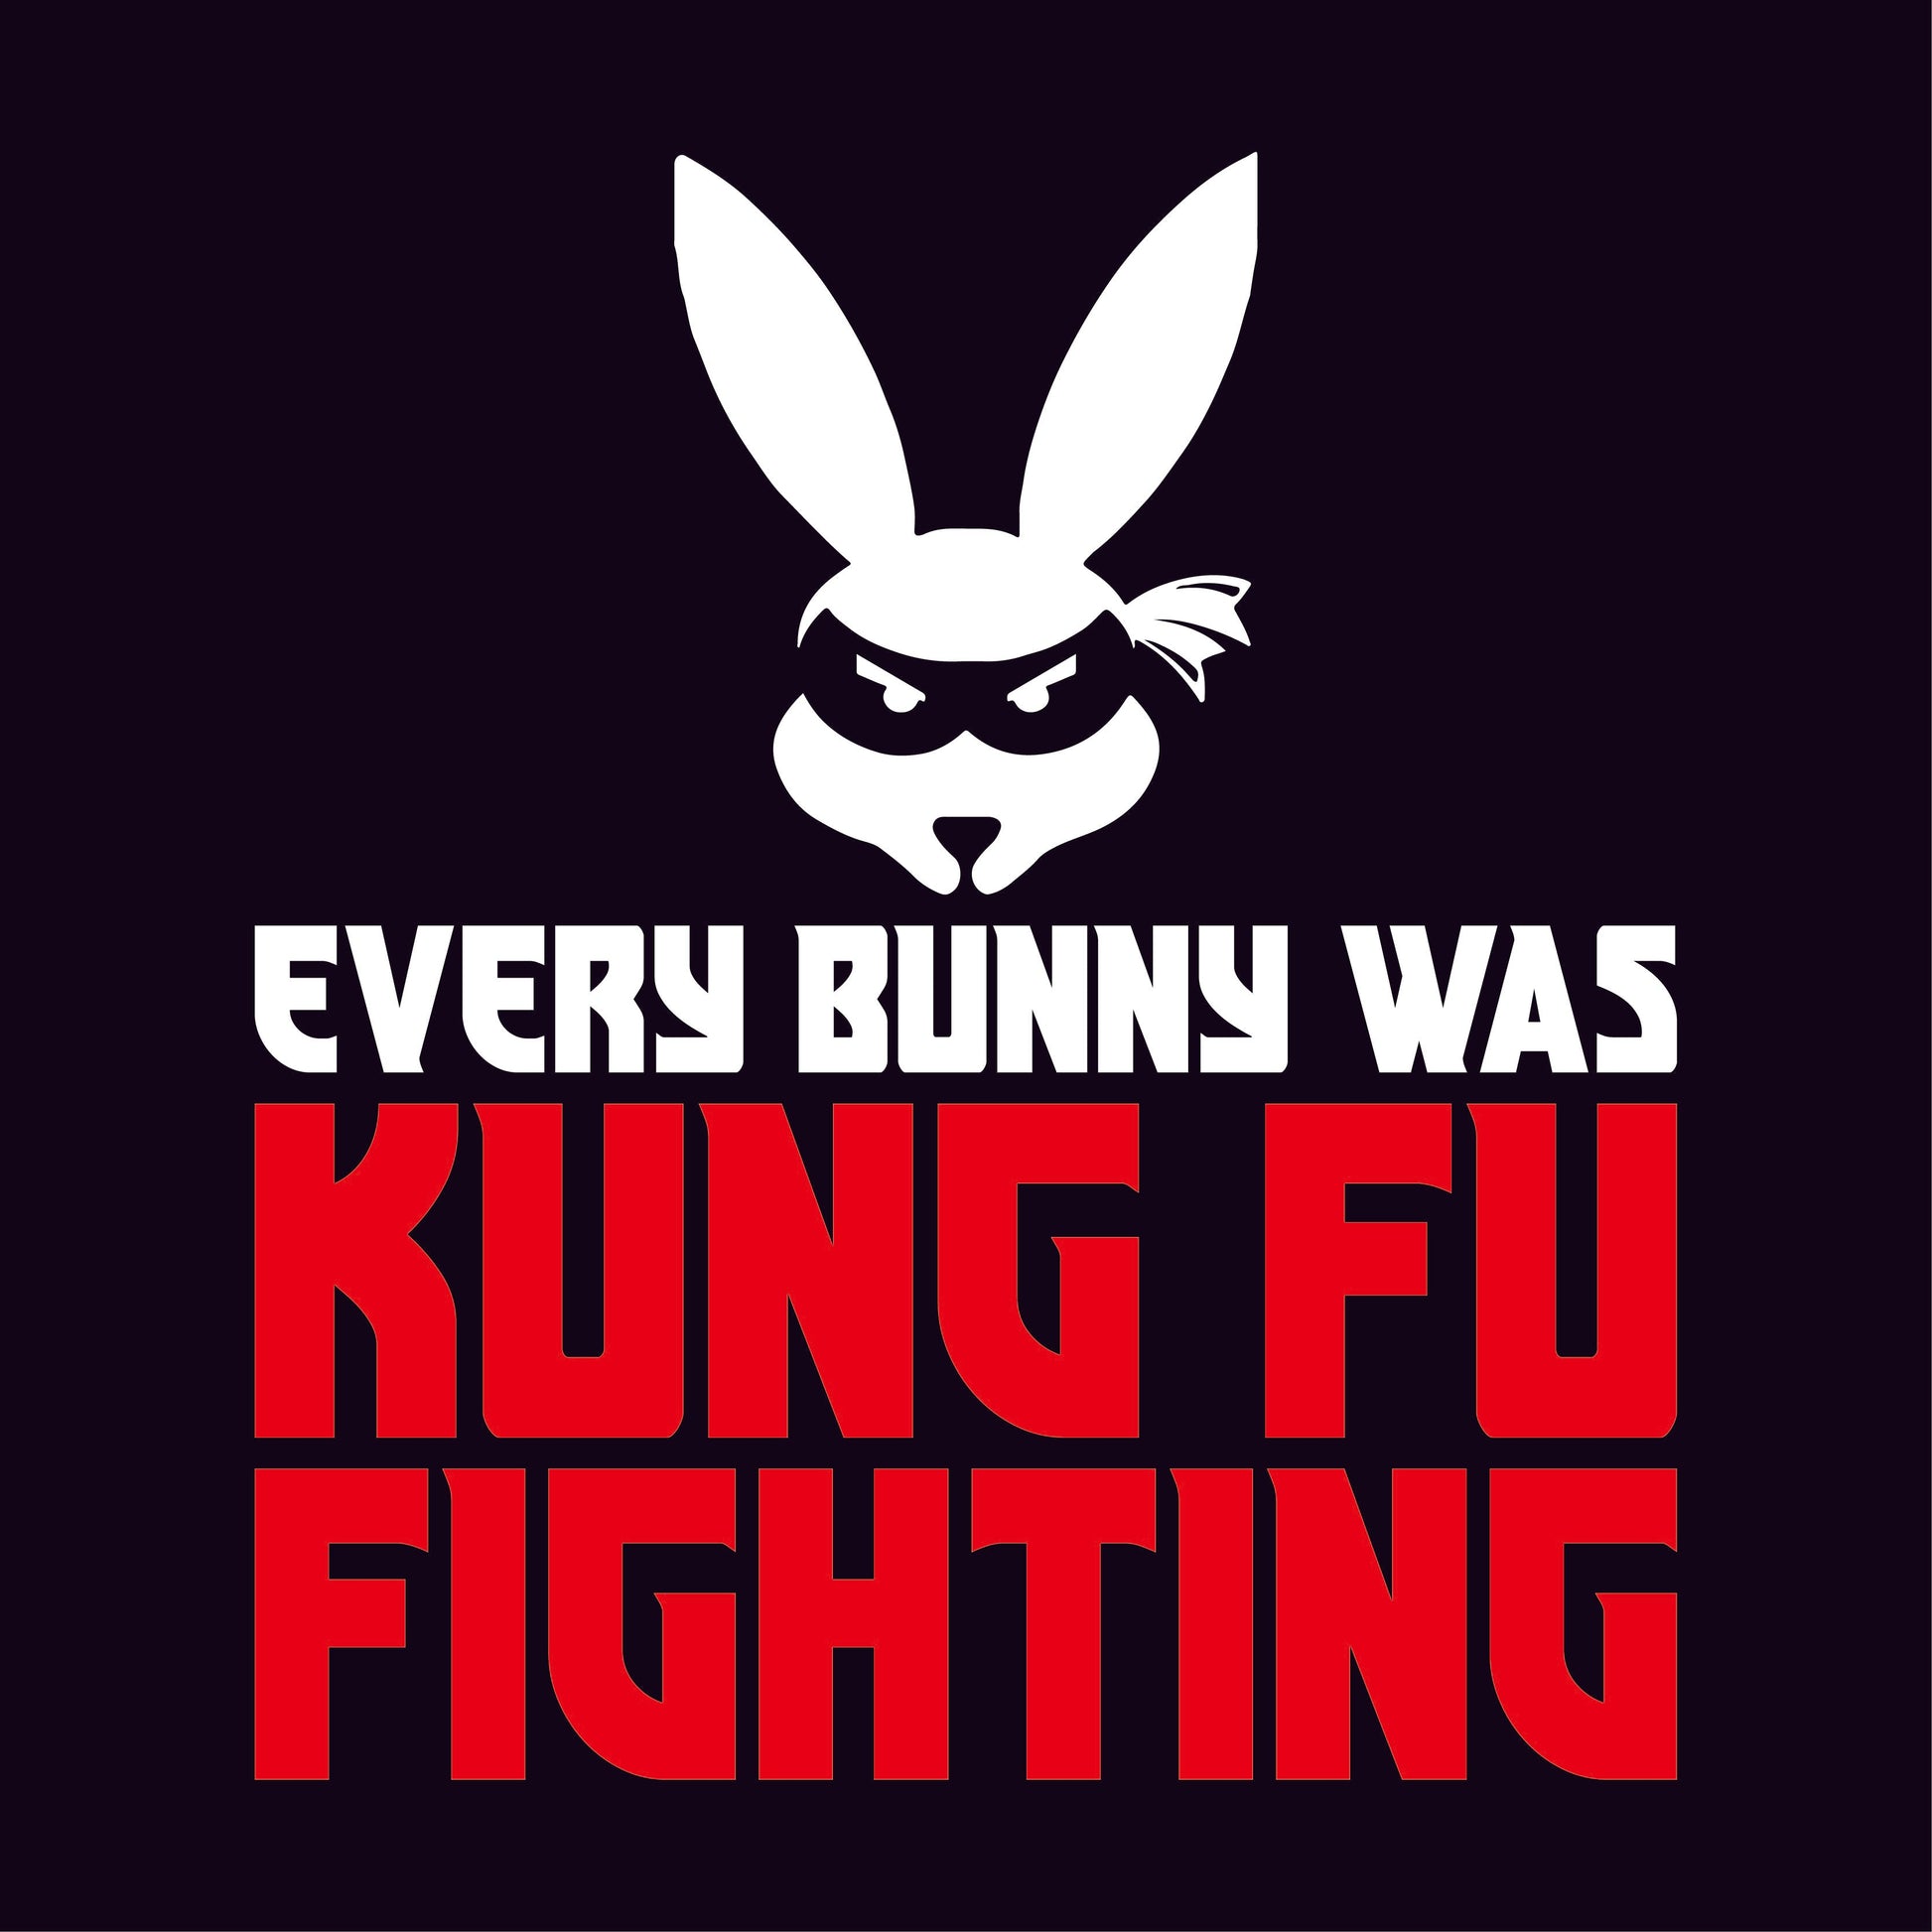 Every Bunny was Kung Fu Fighting - Funny Graphic T Shirts